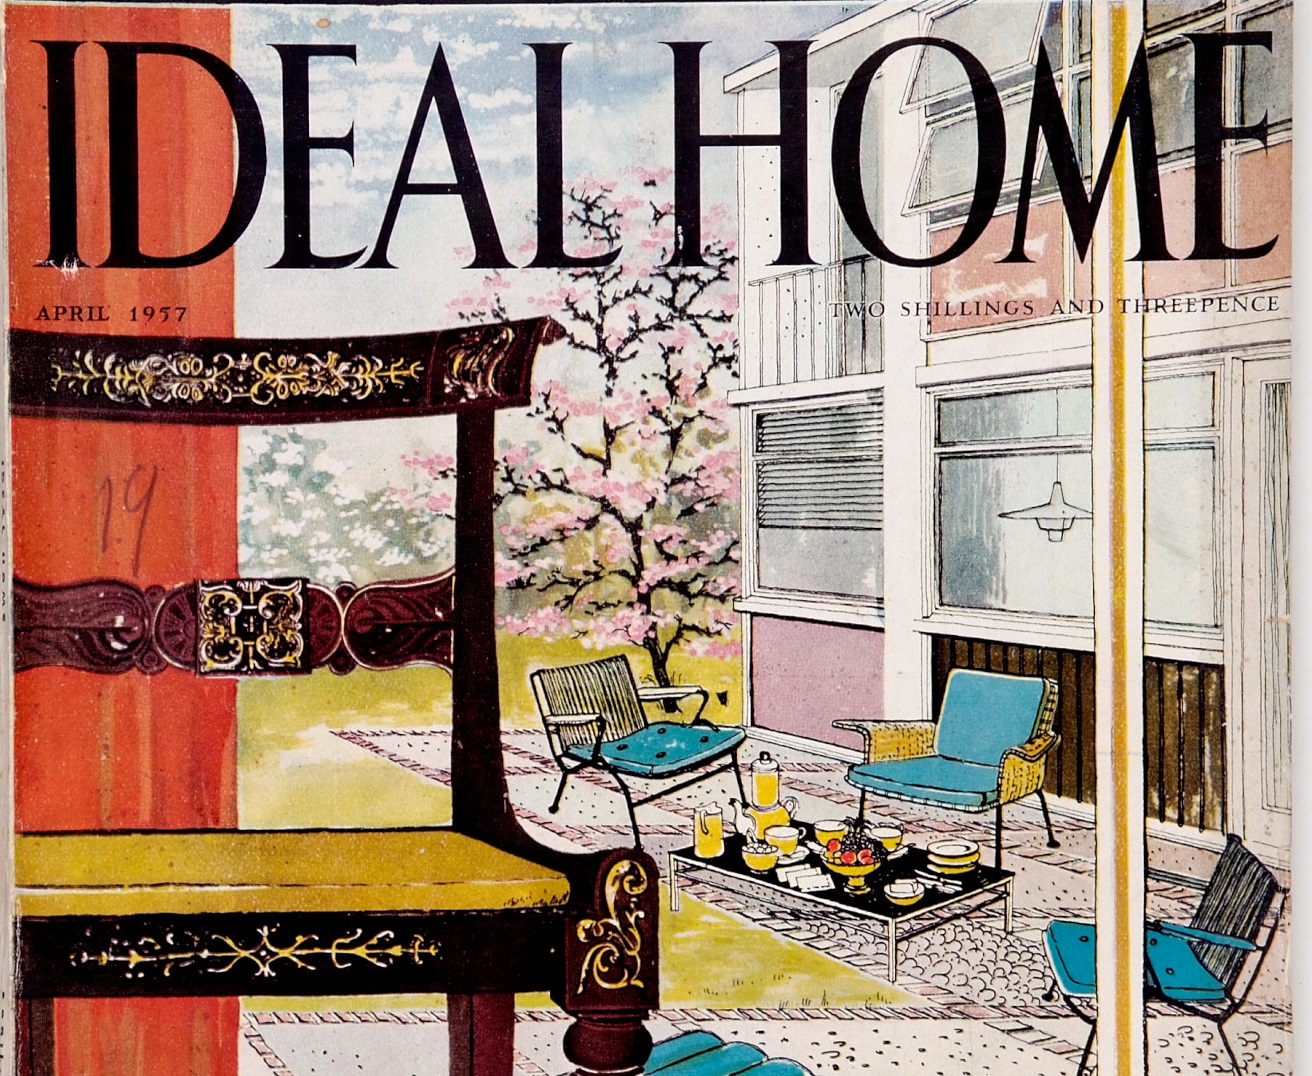 Cover of Magazine Ideal Home showing close-up of chair and house in the background